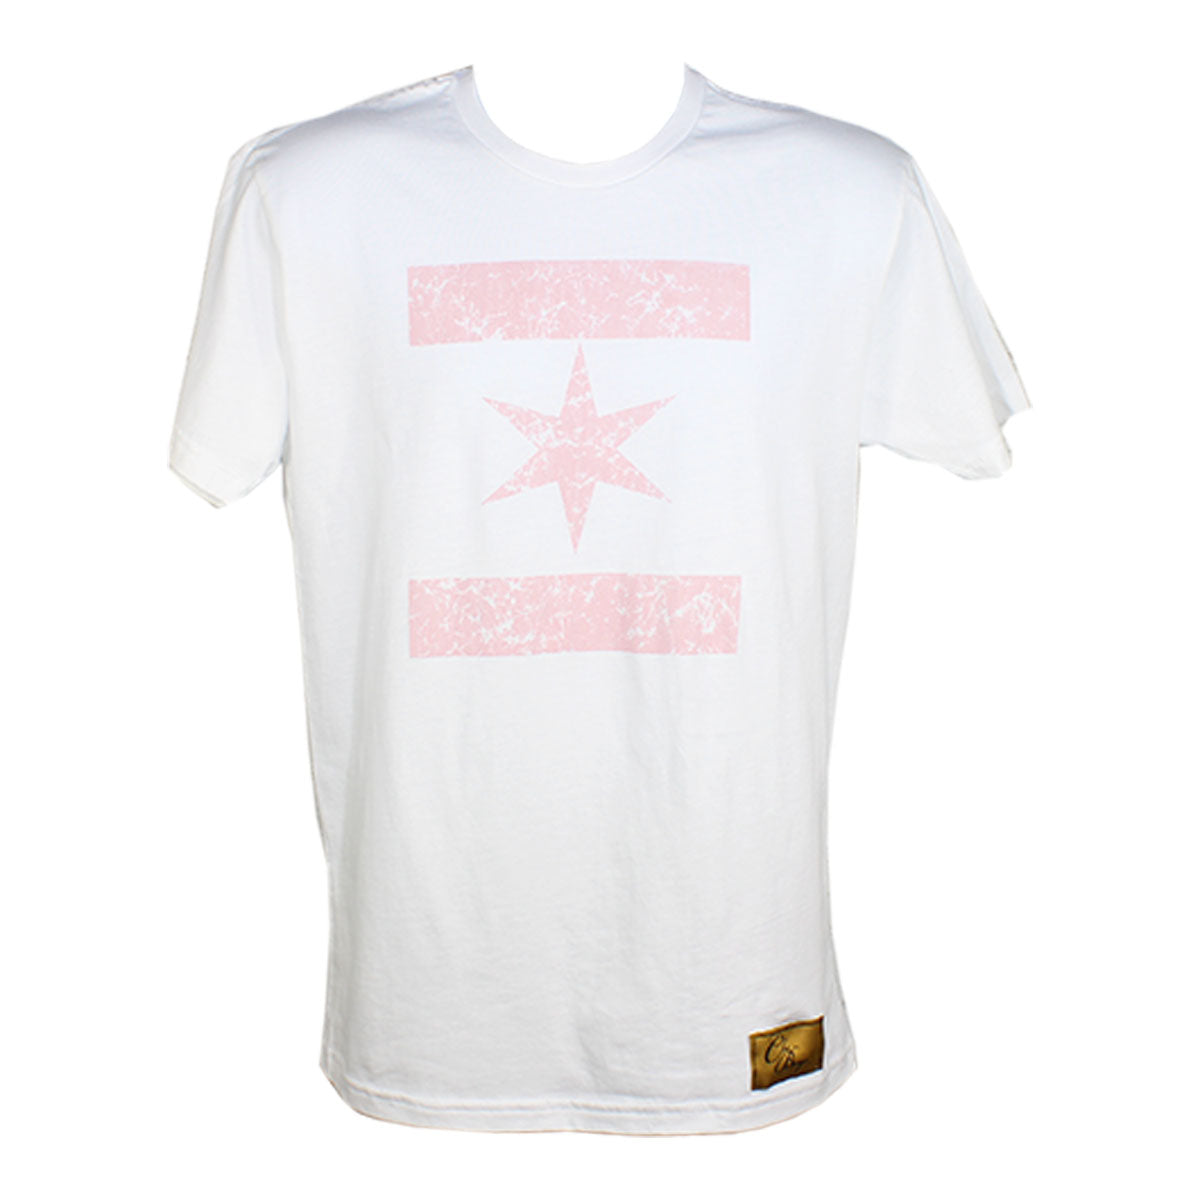 We Are One Star Tee Distressed (White/Grapefruit)